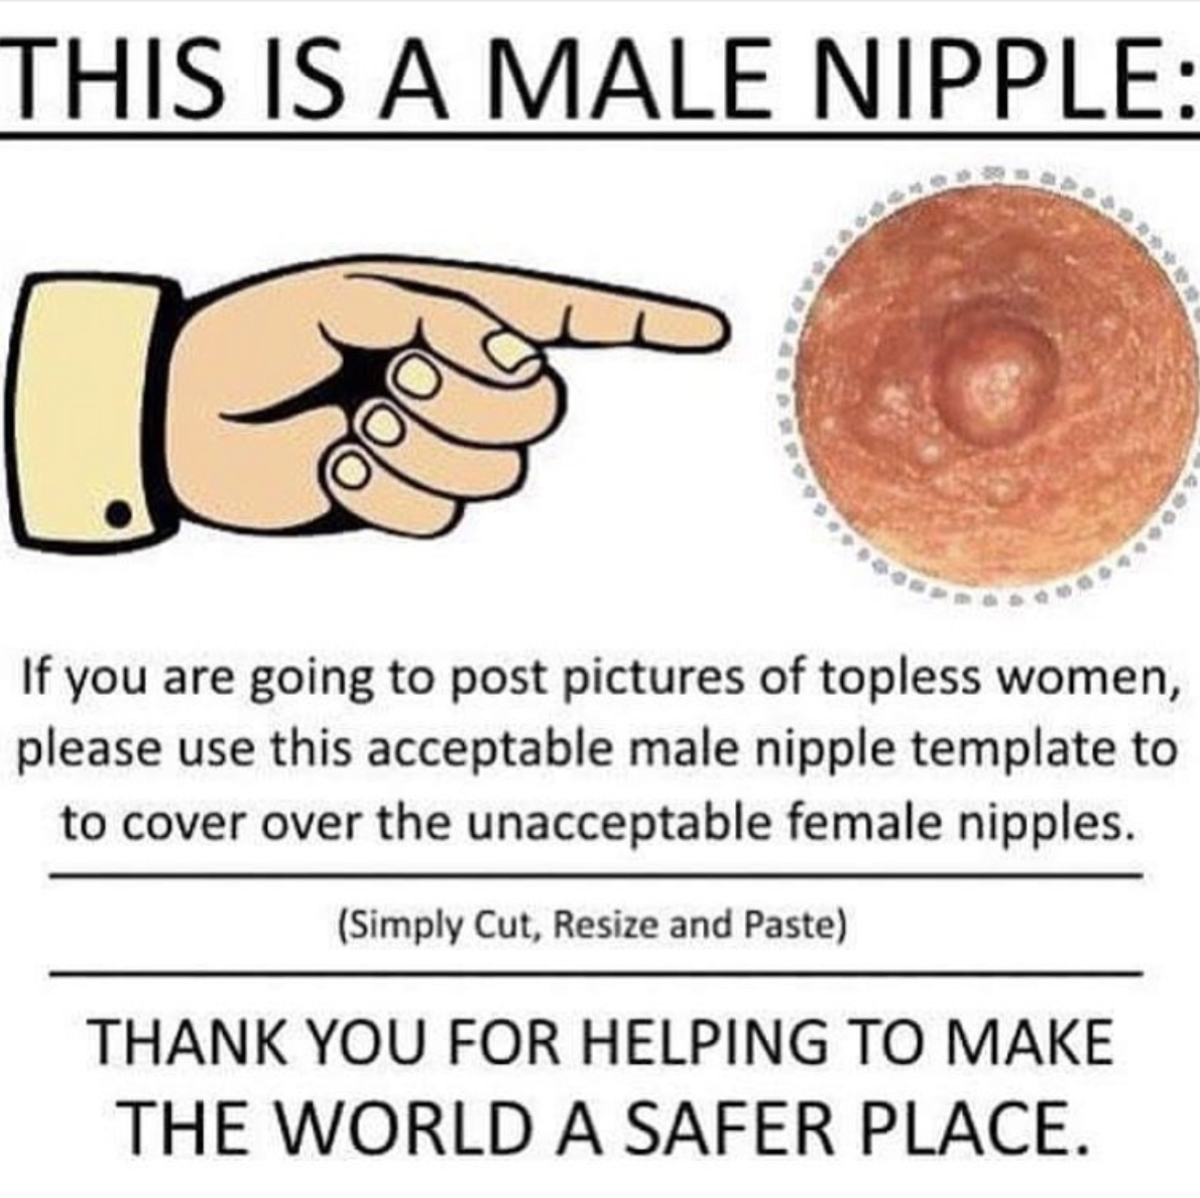 Women's nipples are against the law...but men's are not.